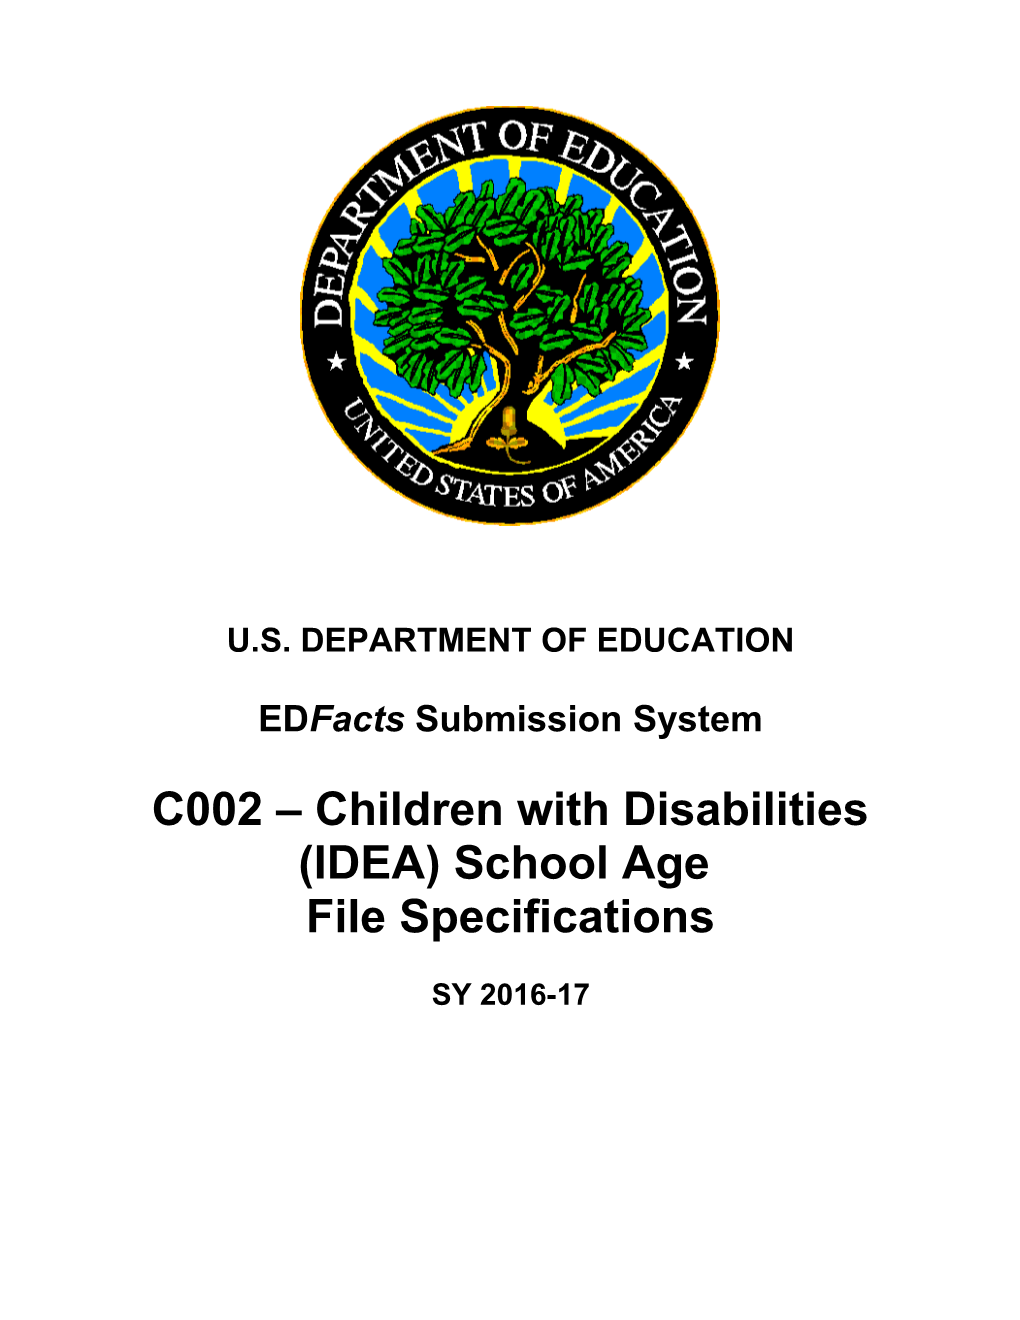 Children with Disabilities (IDEA) School Age File Specifications (Msword)